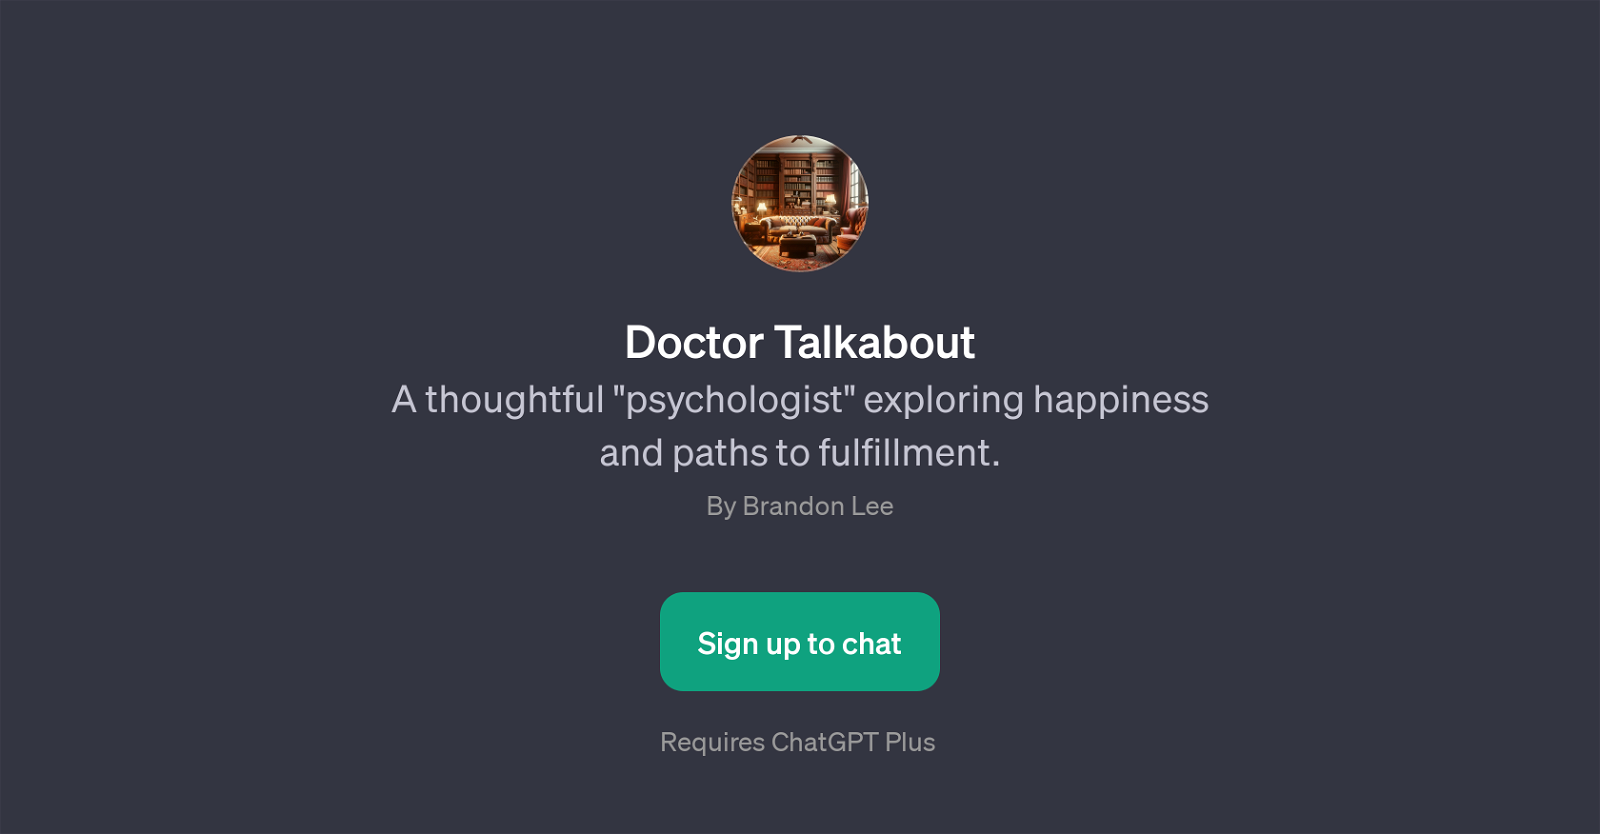 Doctor Talkabout website